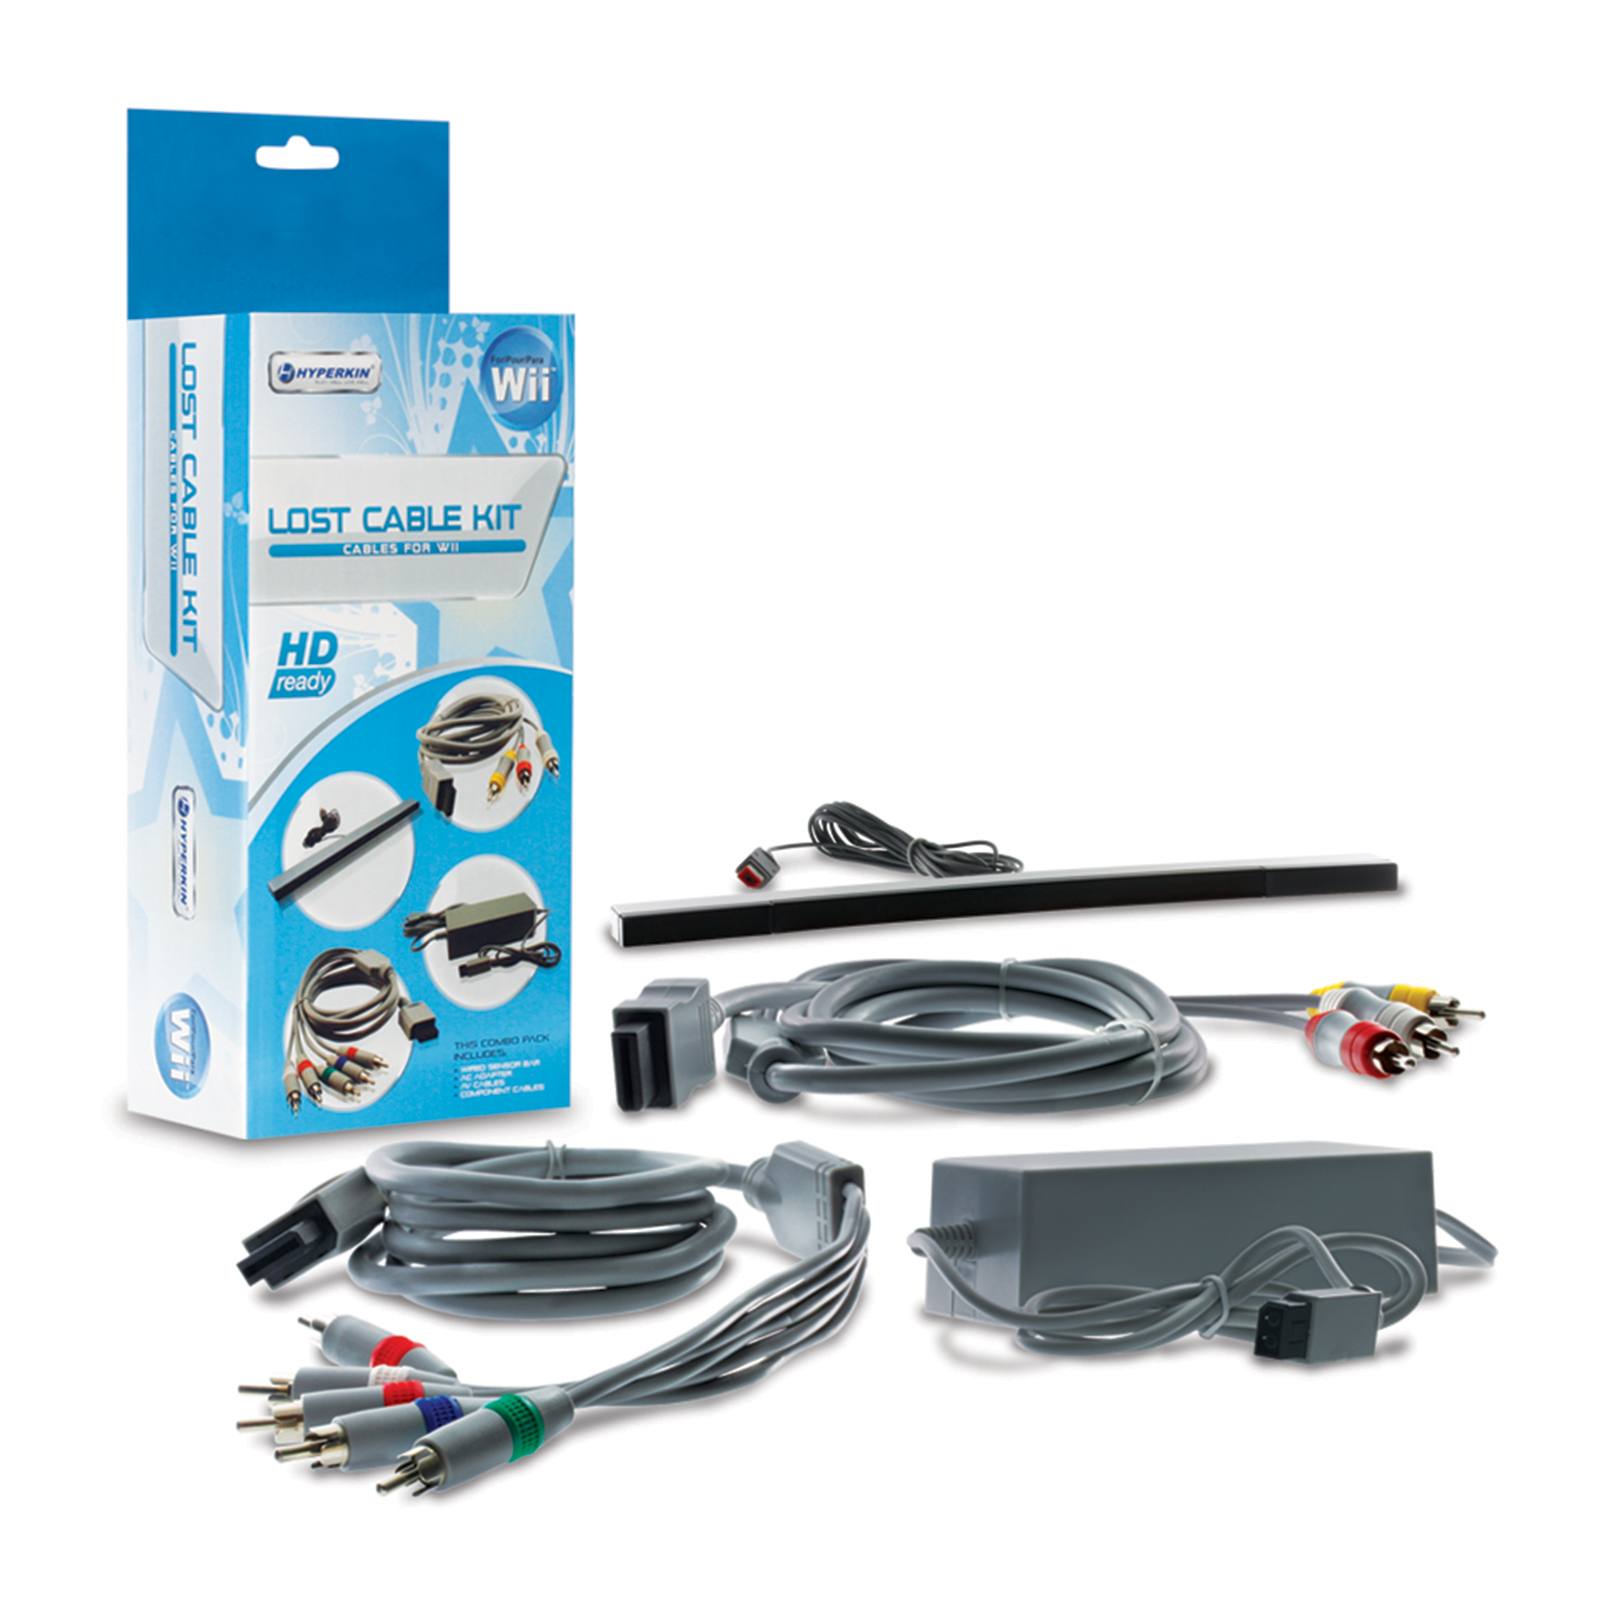 Lost Cable Kit for Nintendo Wii